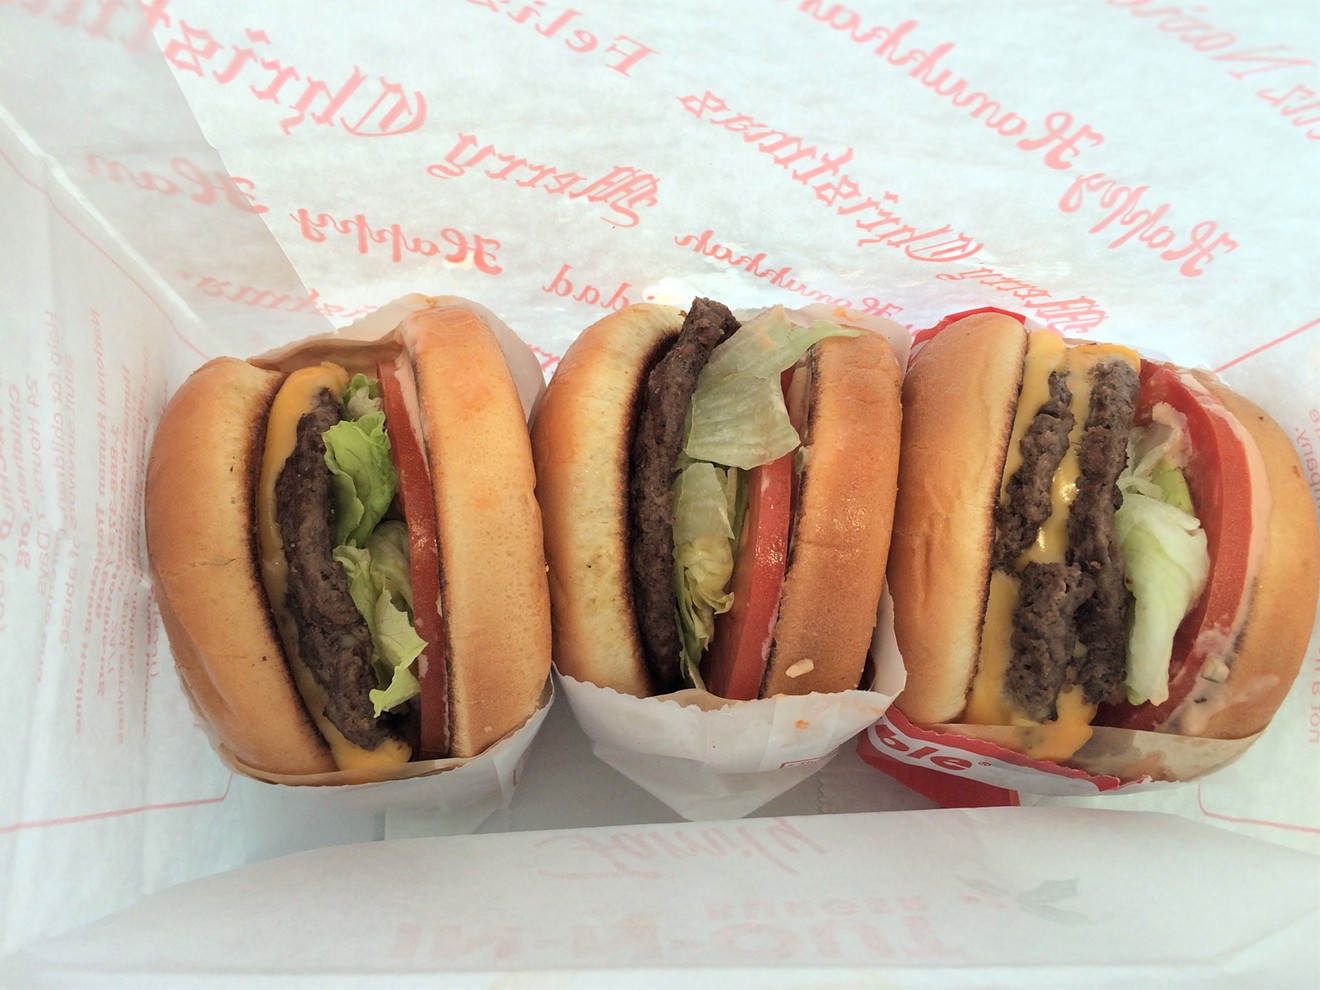 In-N-Out's burgers are pretty as a picture.